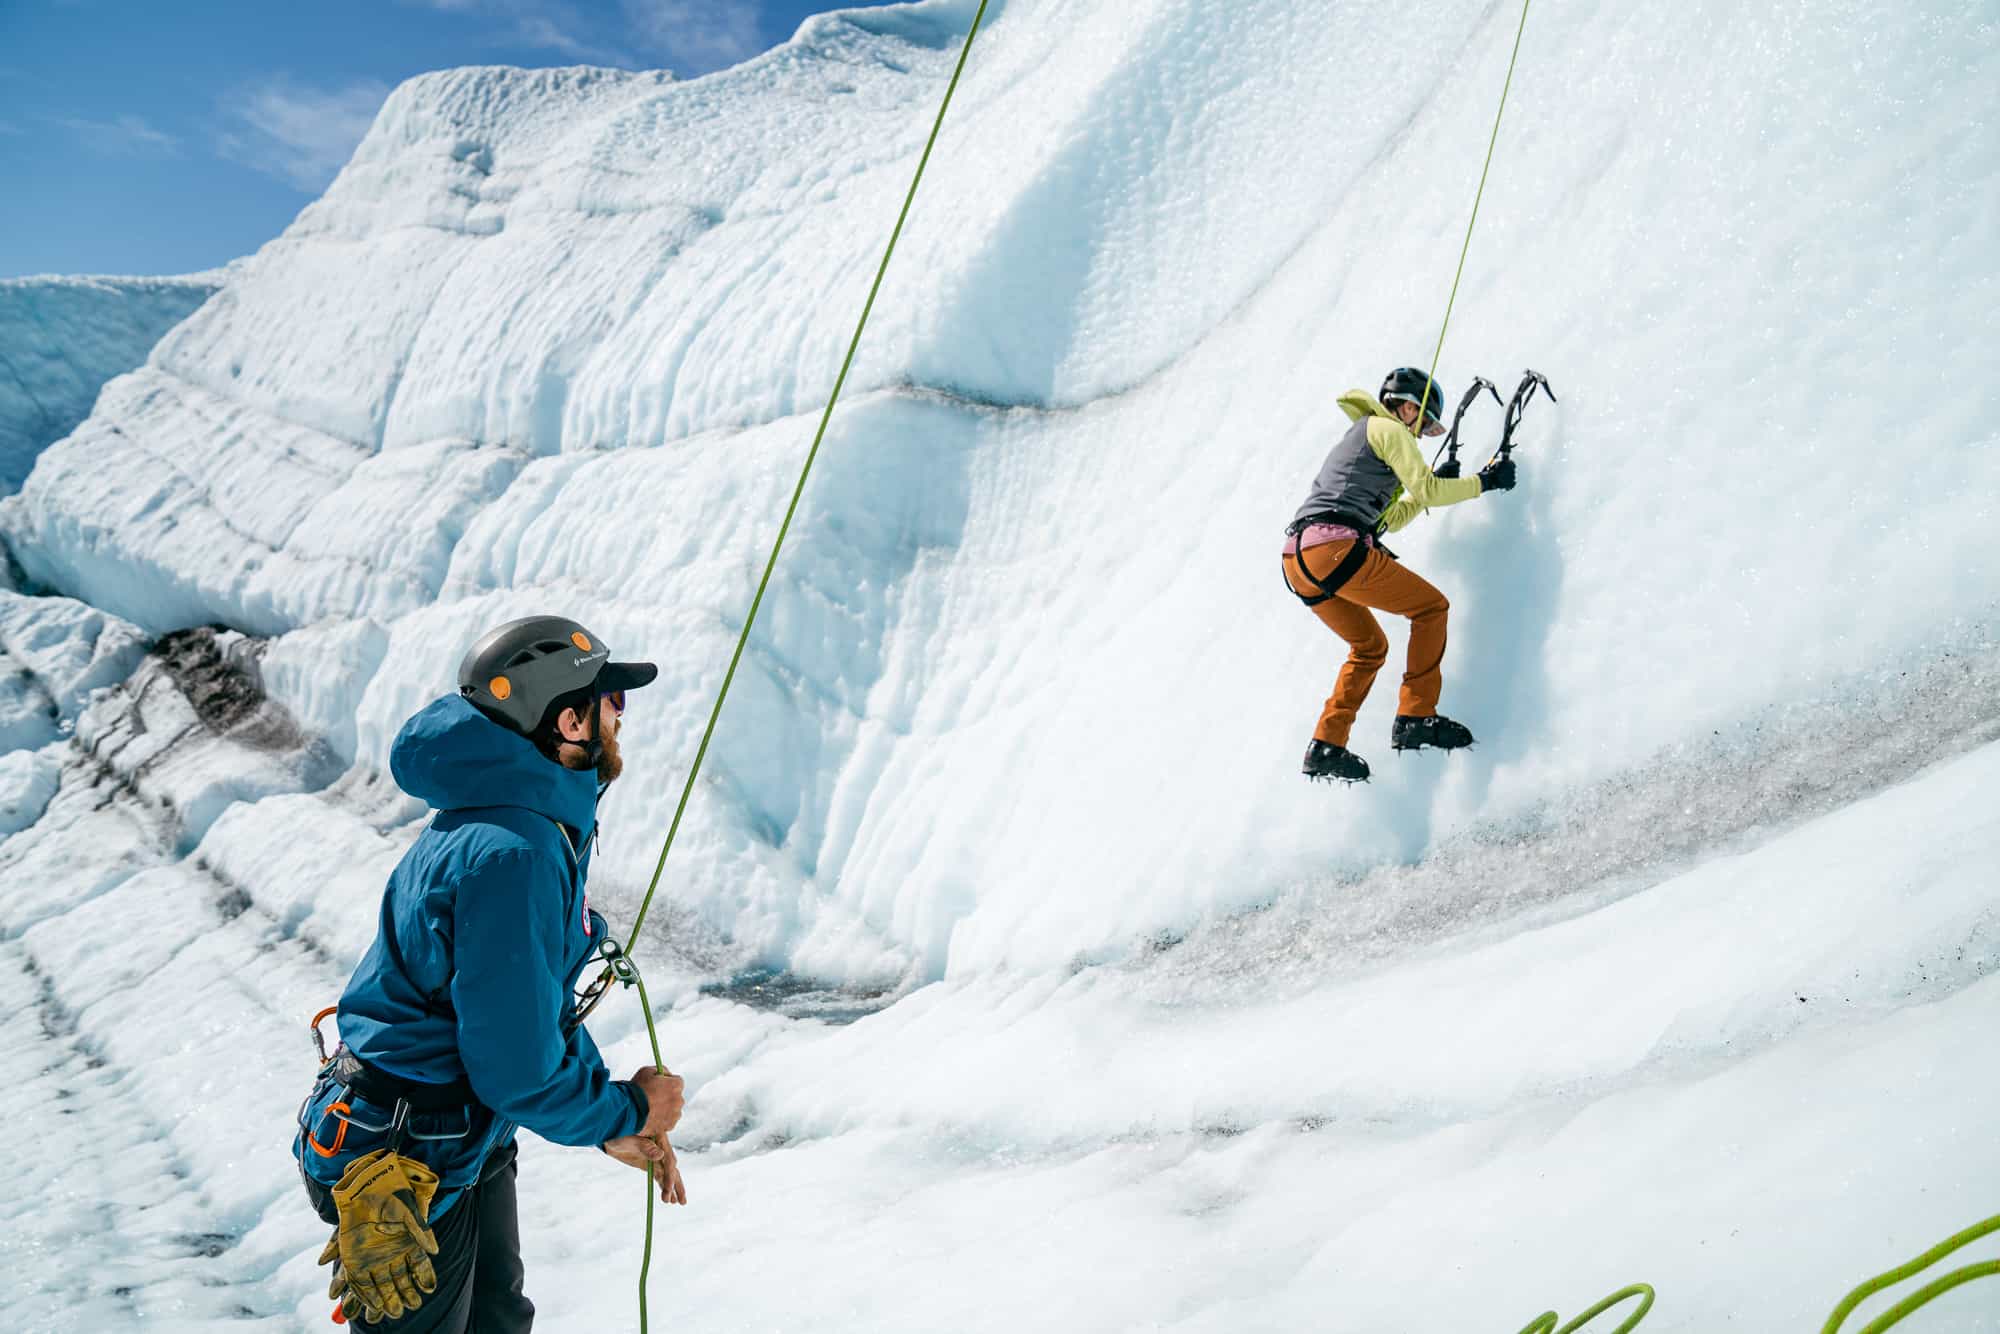 One person belaying another person who is ice climbing